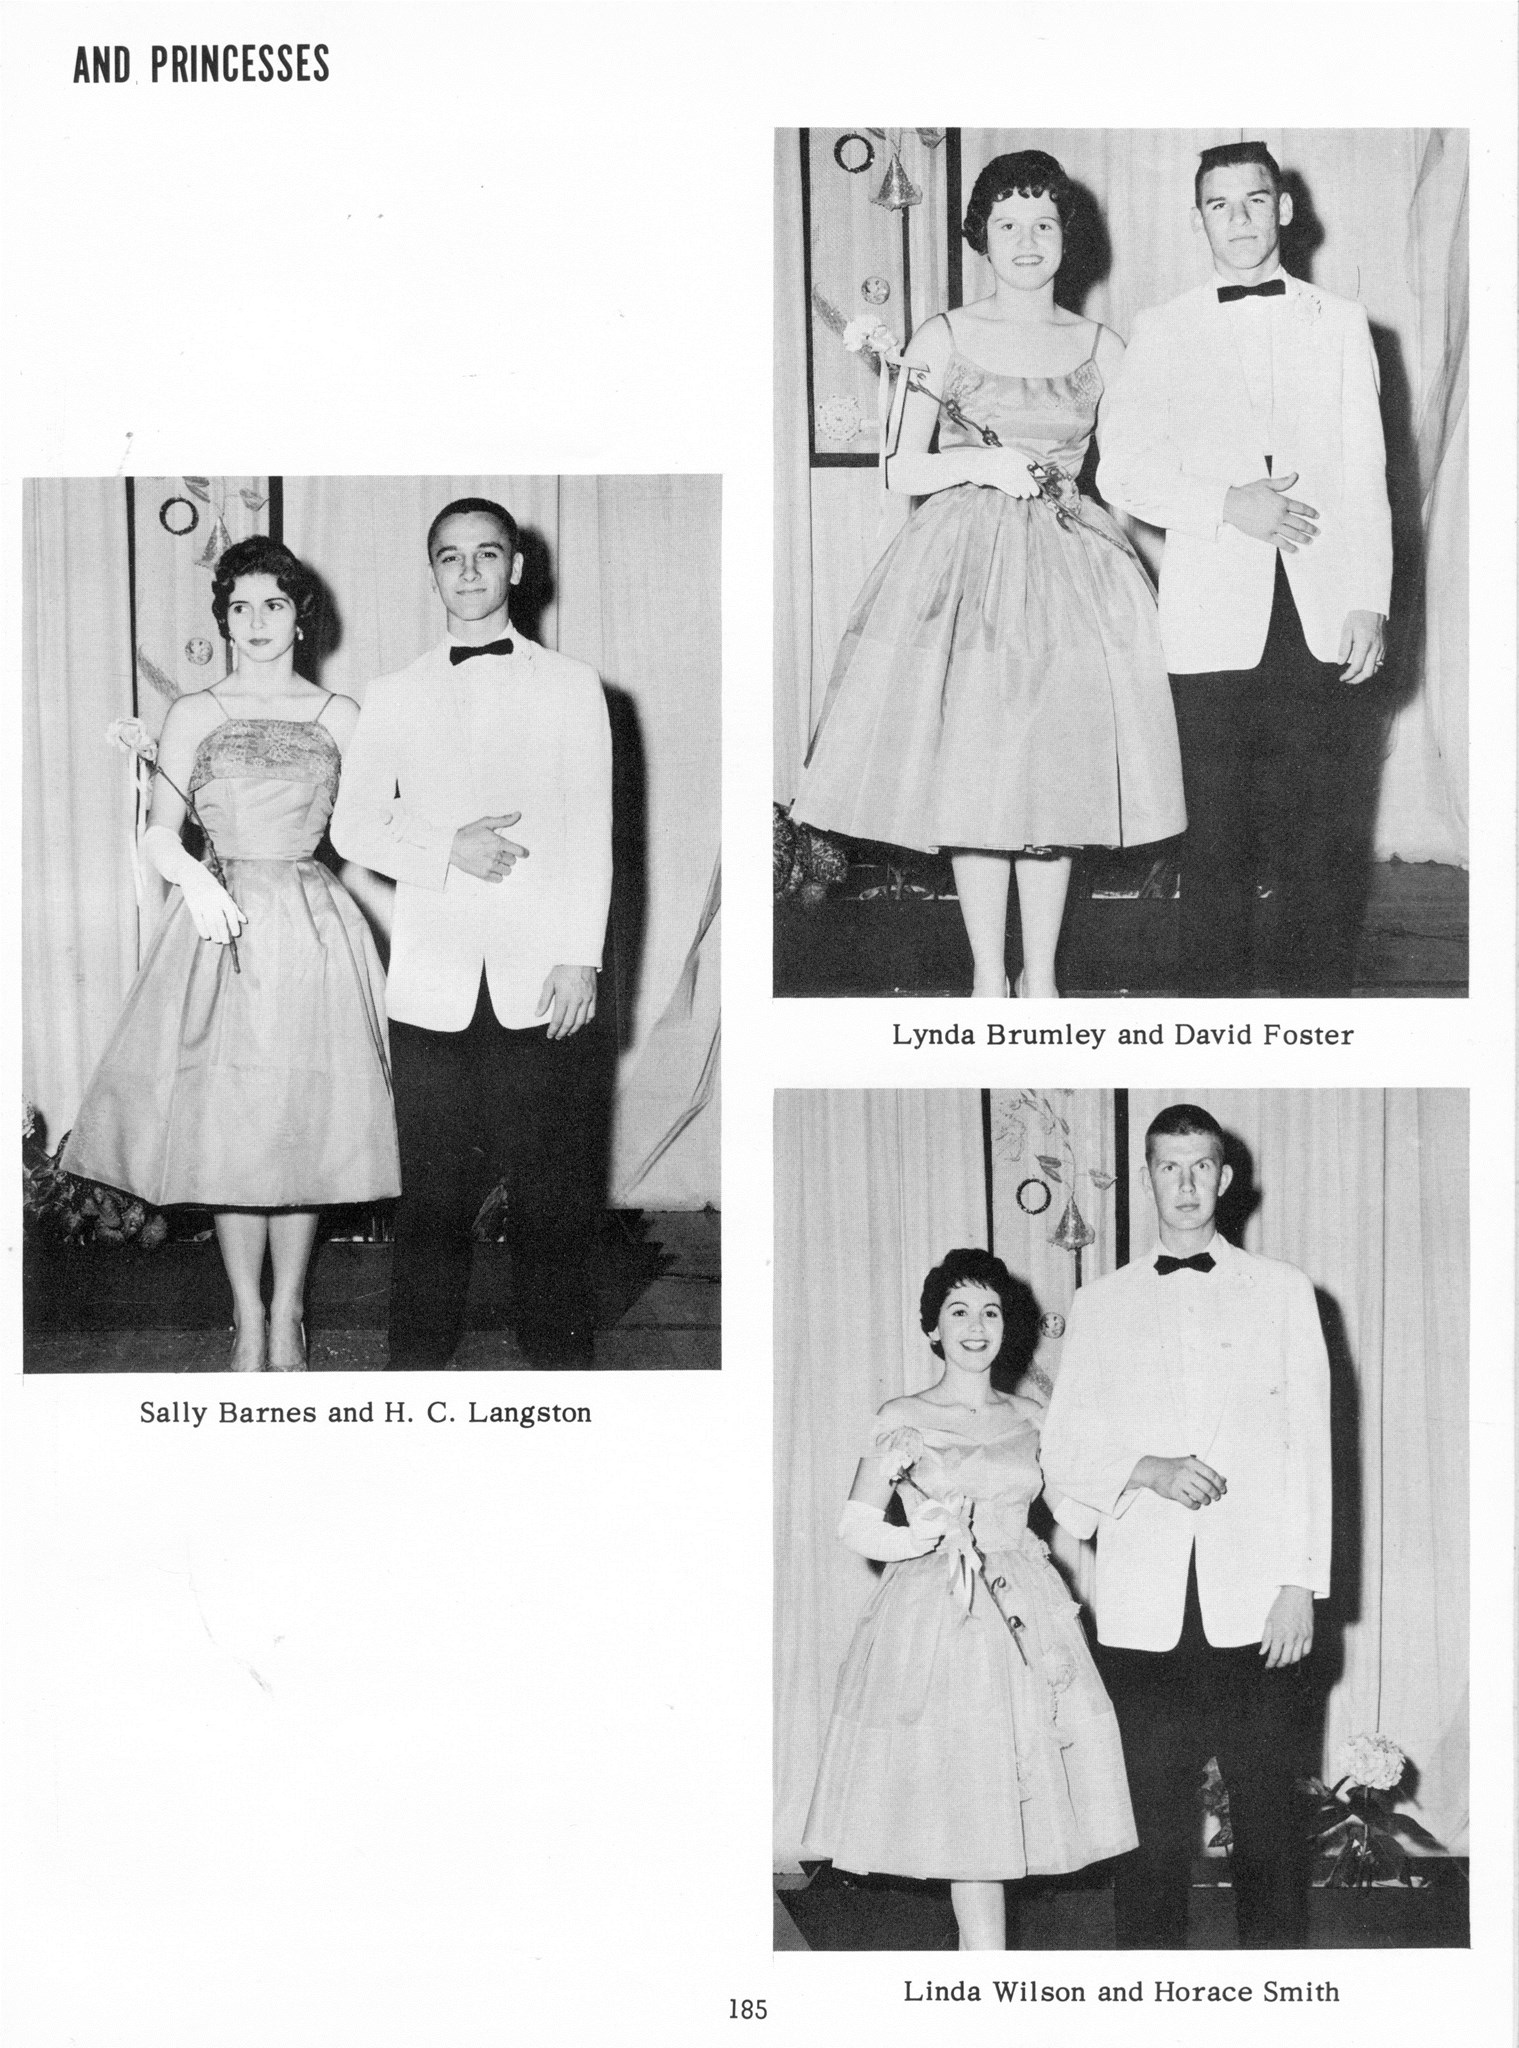 ../../../Images/Large/1960/Arclight-1960-pg0185.jpg